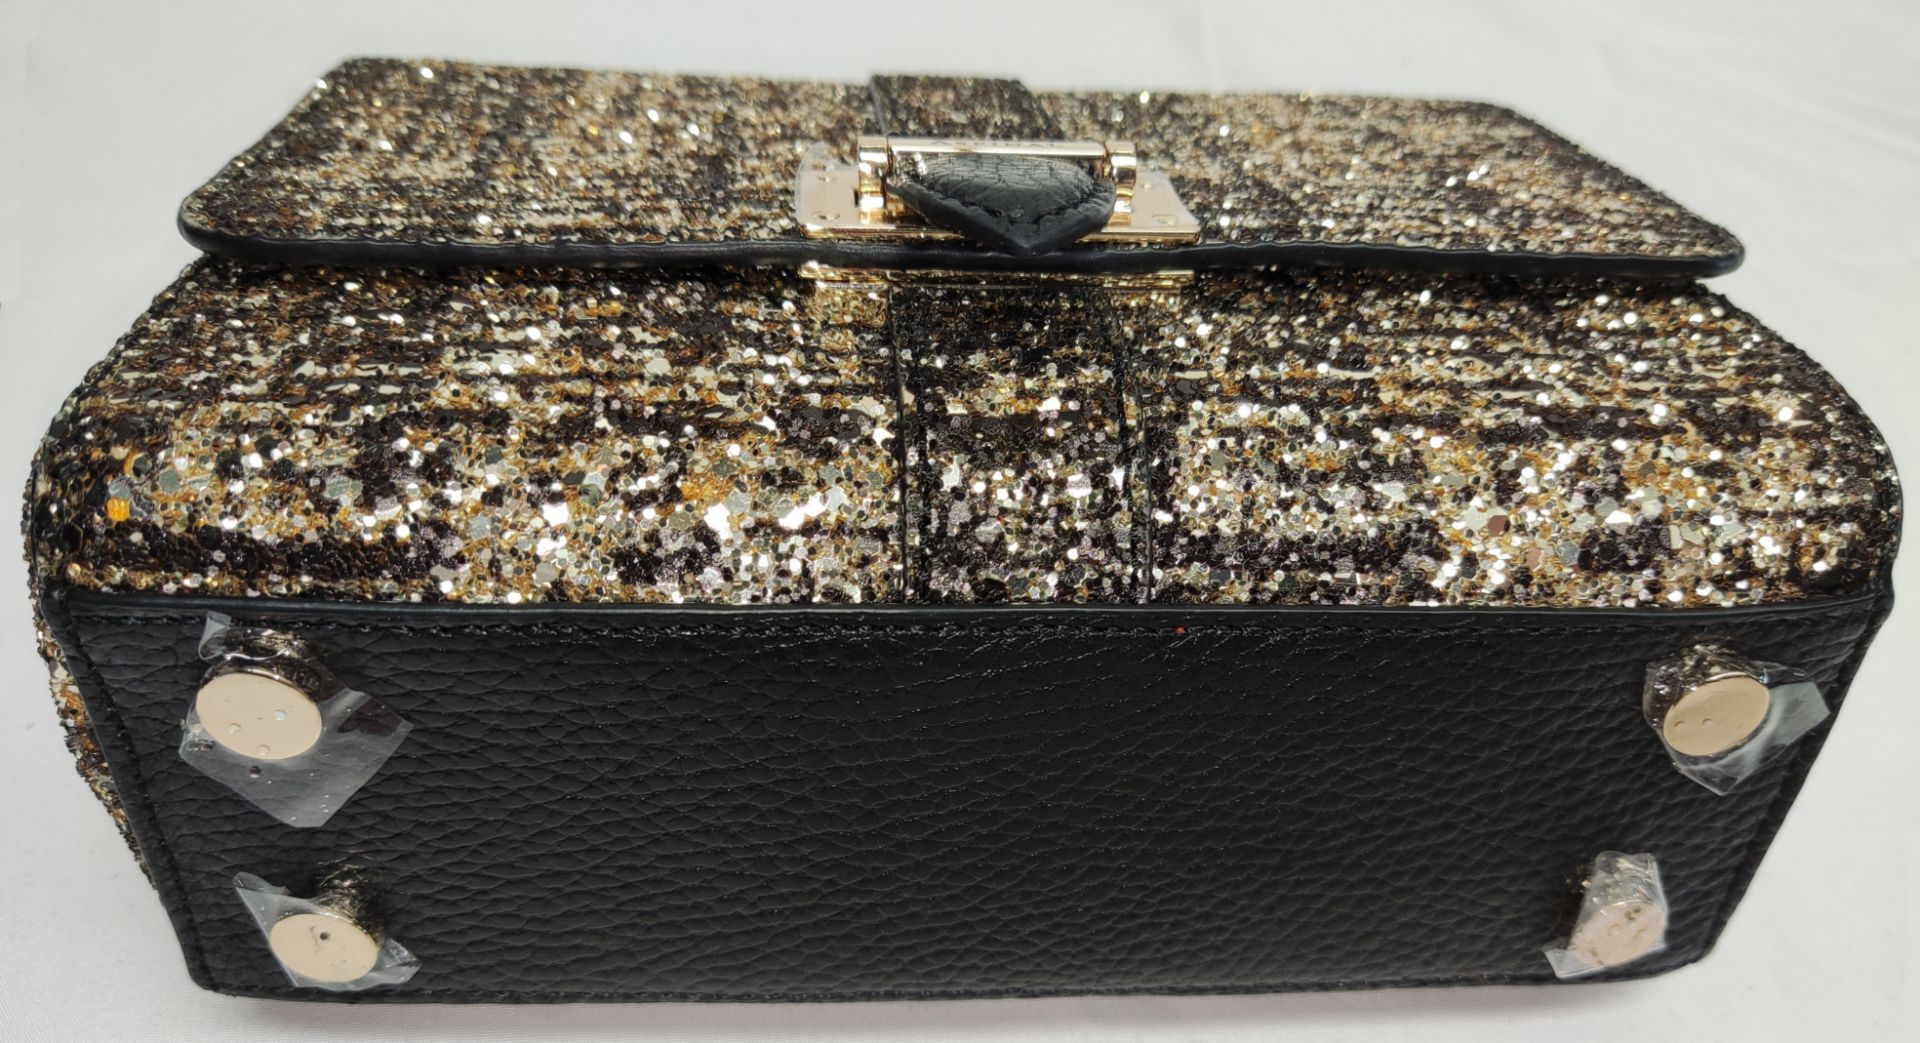 1 x ASPINAL OF LONDON Lottie Bag With Glitter Finish - Boxed - Original RRP £595 - Ref: 7268436/ - Image 5 of 16